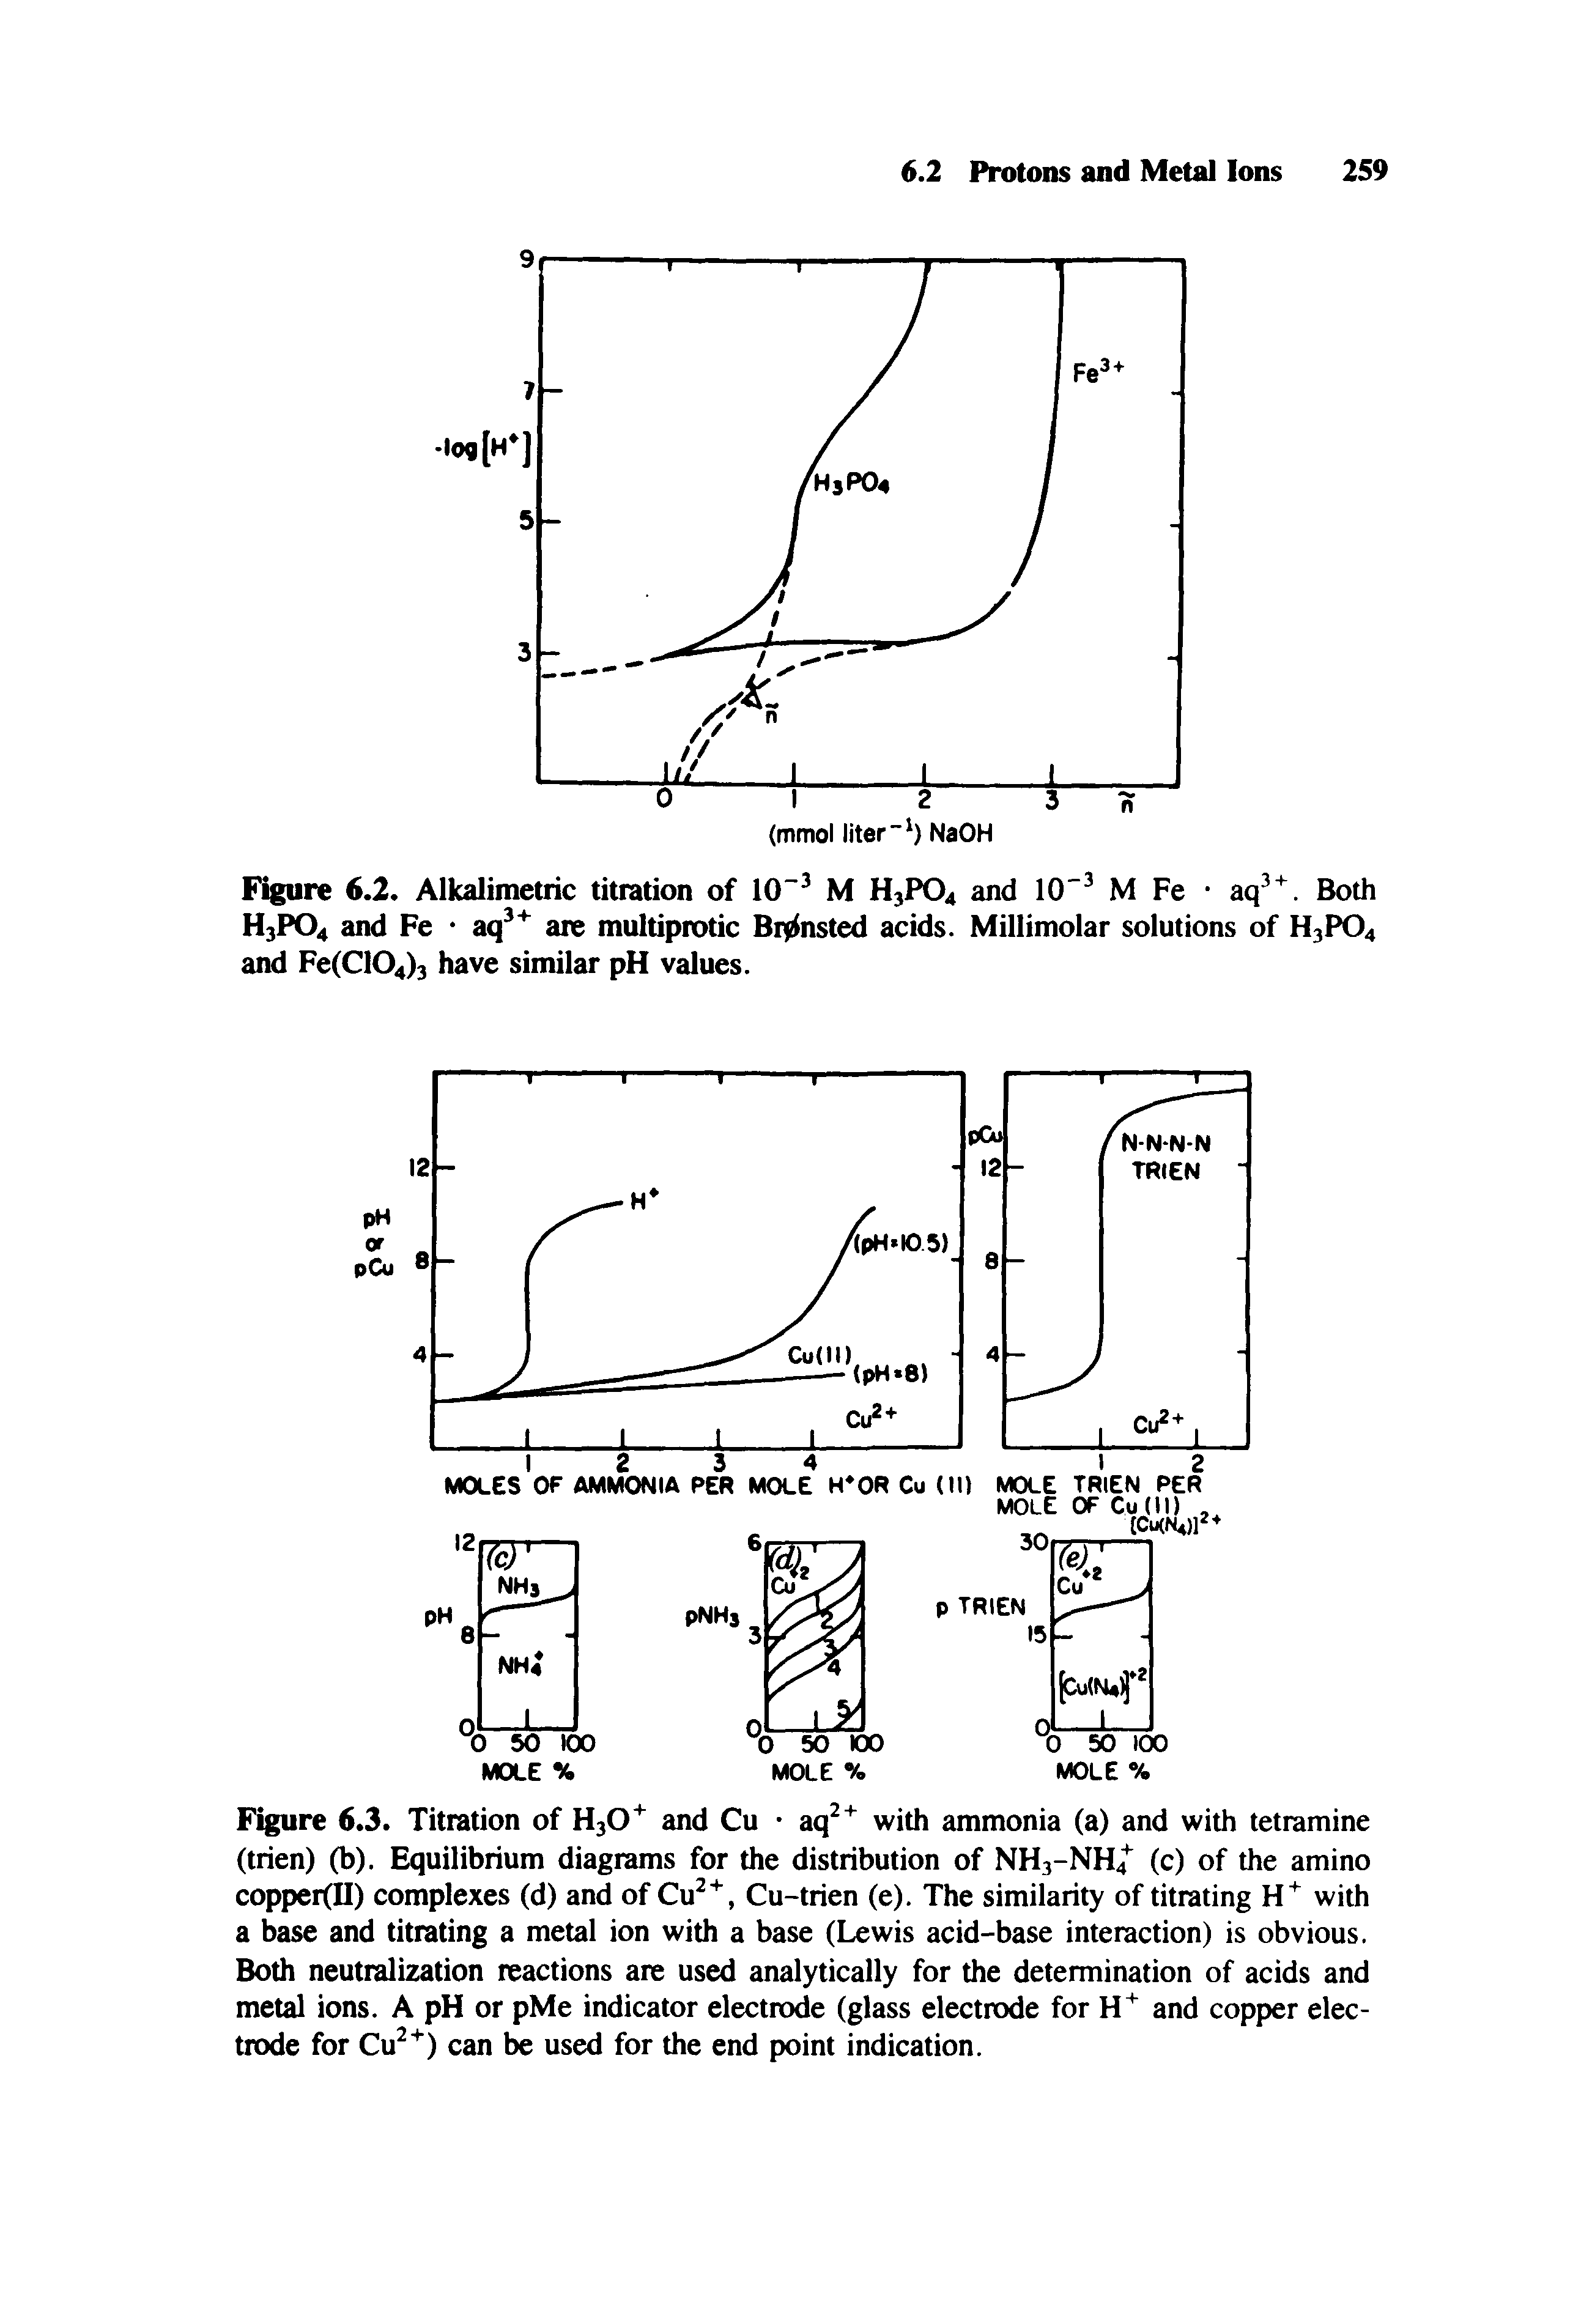 Figure 6.2. Alkalimetric titration of 10 M H3PO4 and 10" M Fe aq. Both H3PO4 and Fe aq are multiprotic Br nsted acids. Millimolar solutions of H3PO4 and Fe(C104>3 similar pH values.